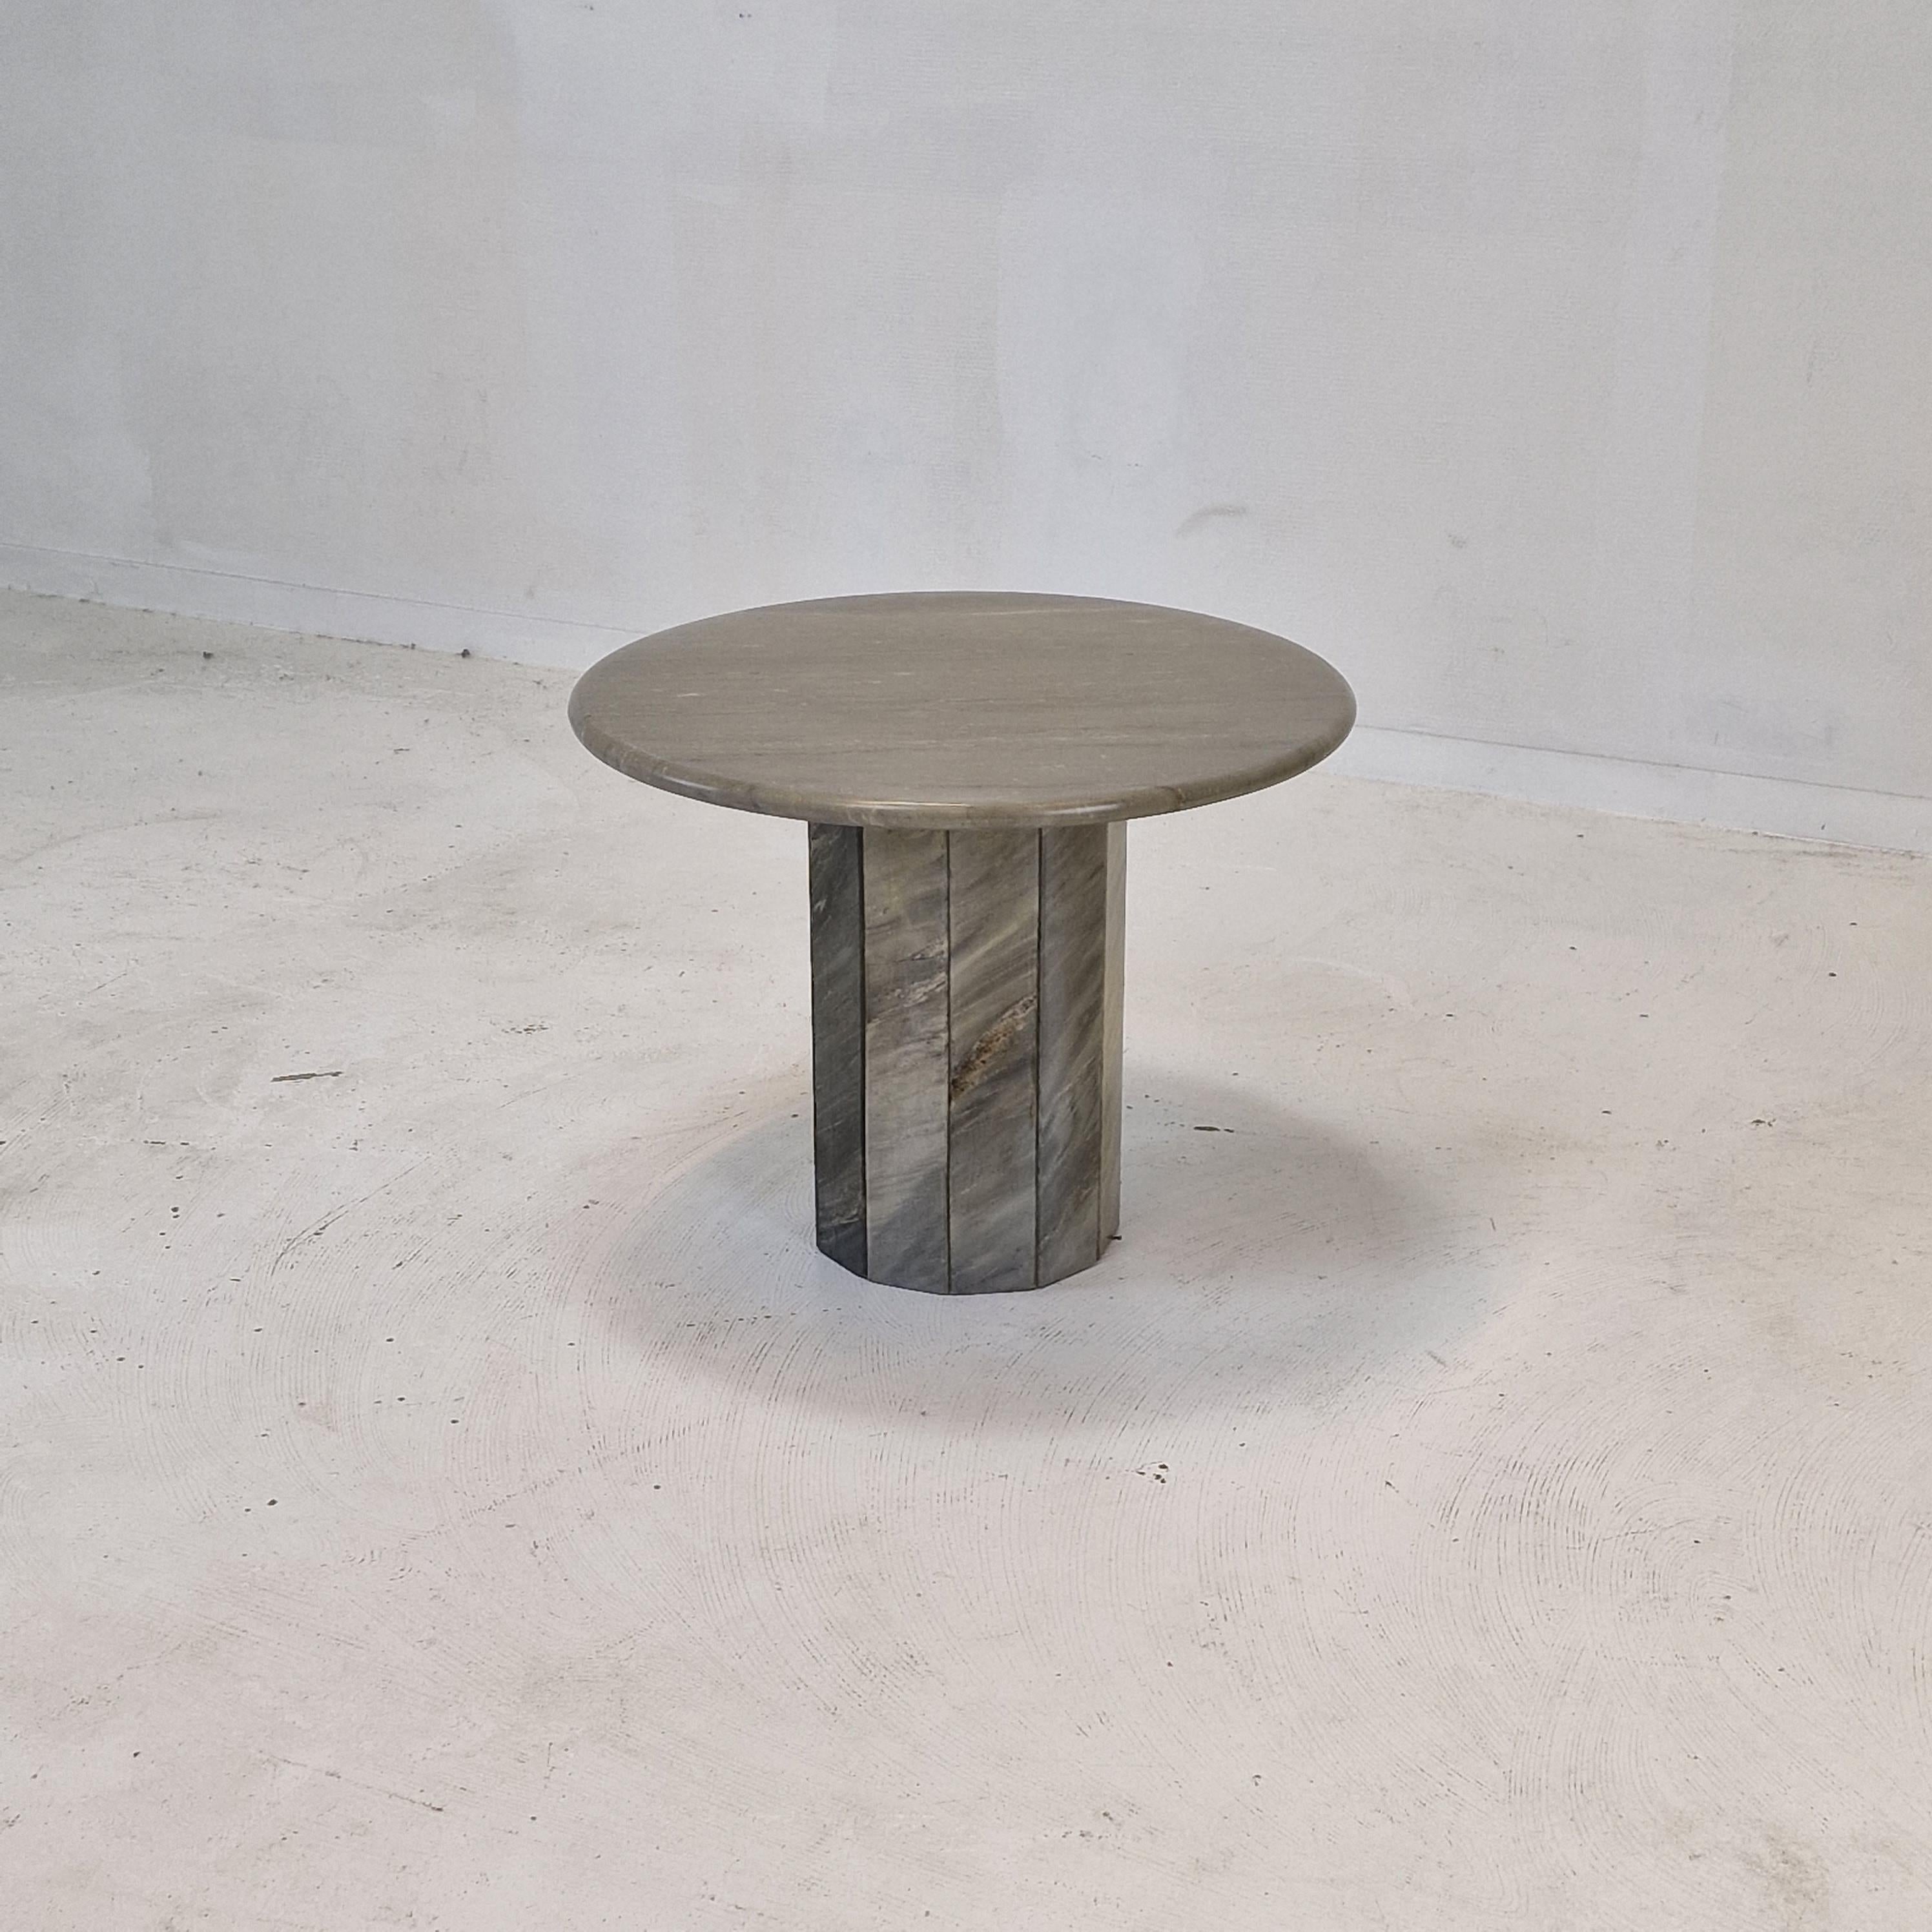 Round Italian Marble Coffee or Side Table, 1980's For Sale 8